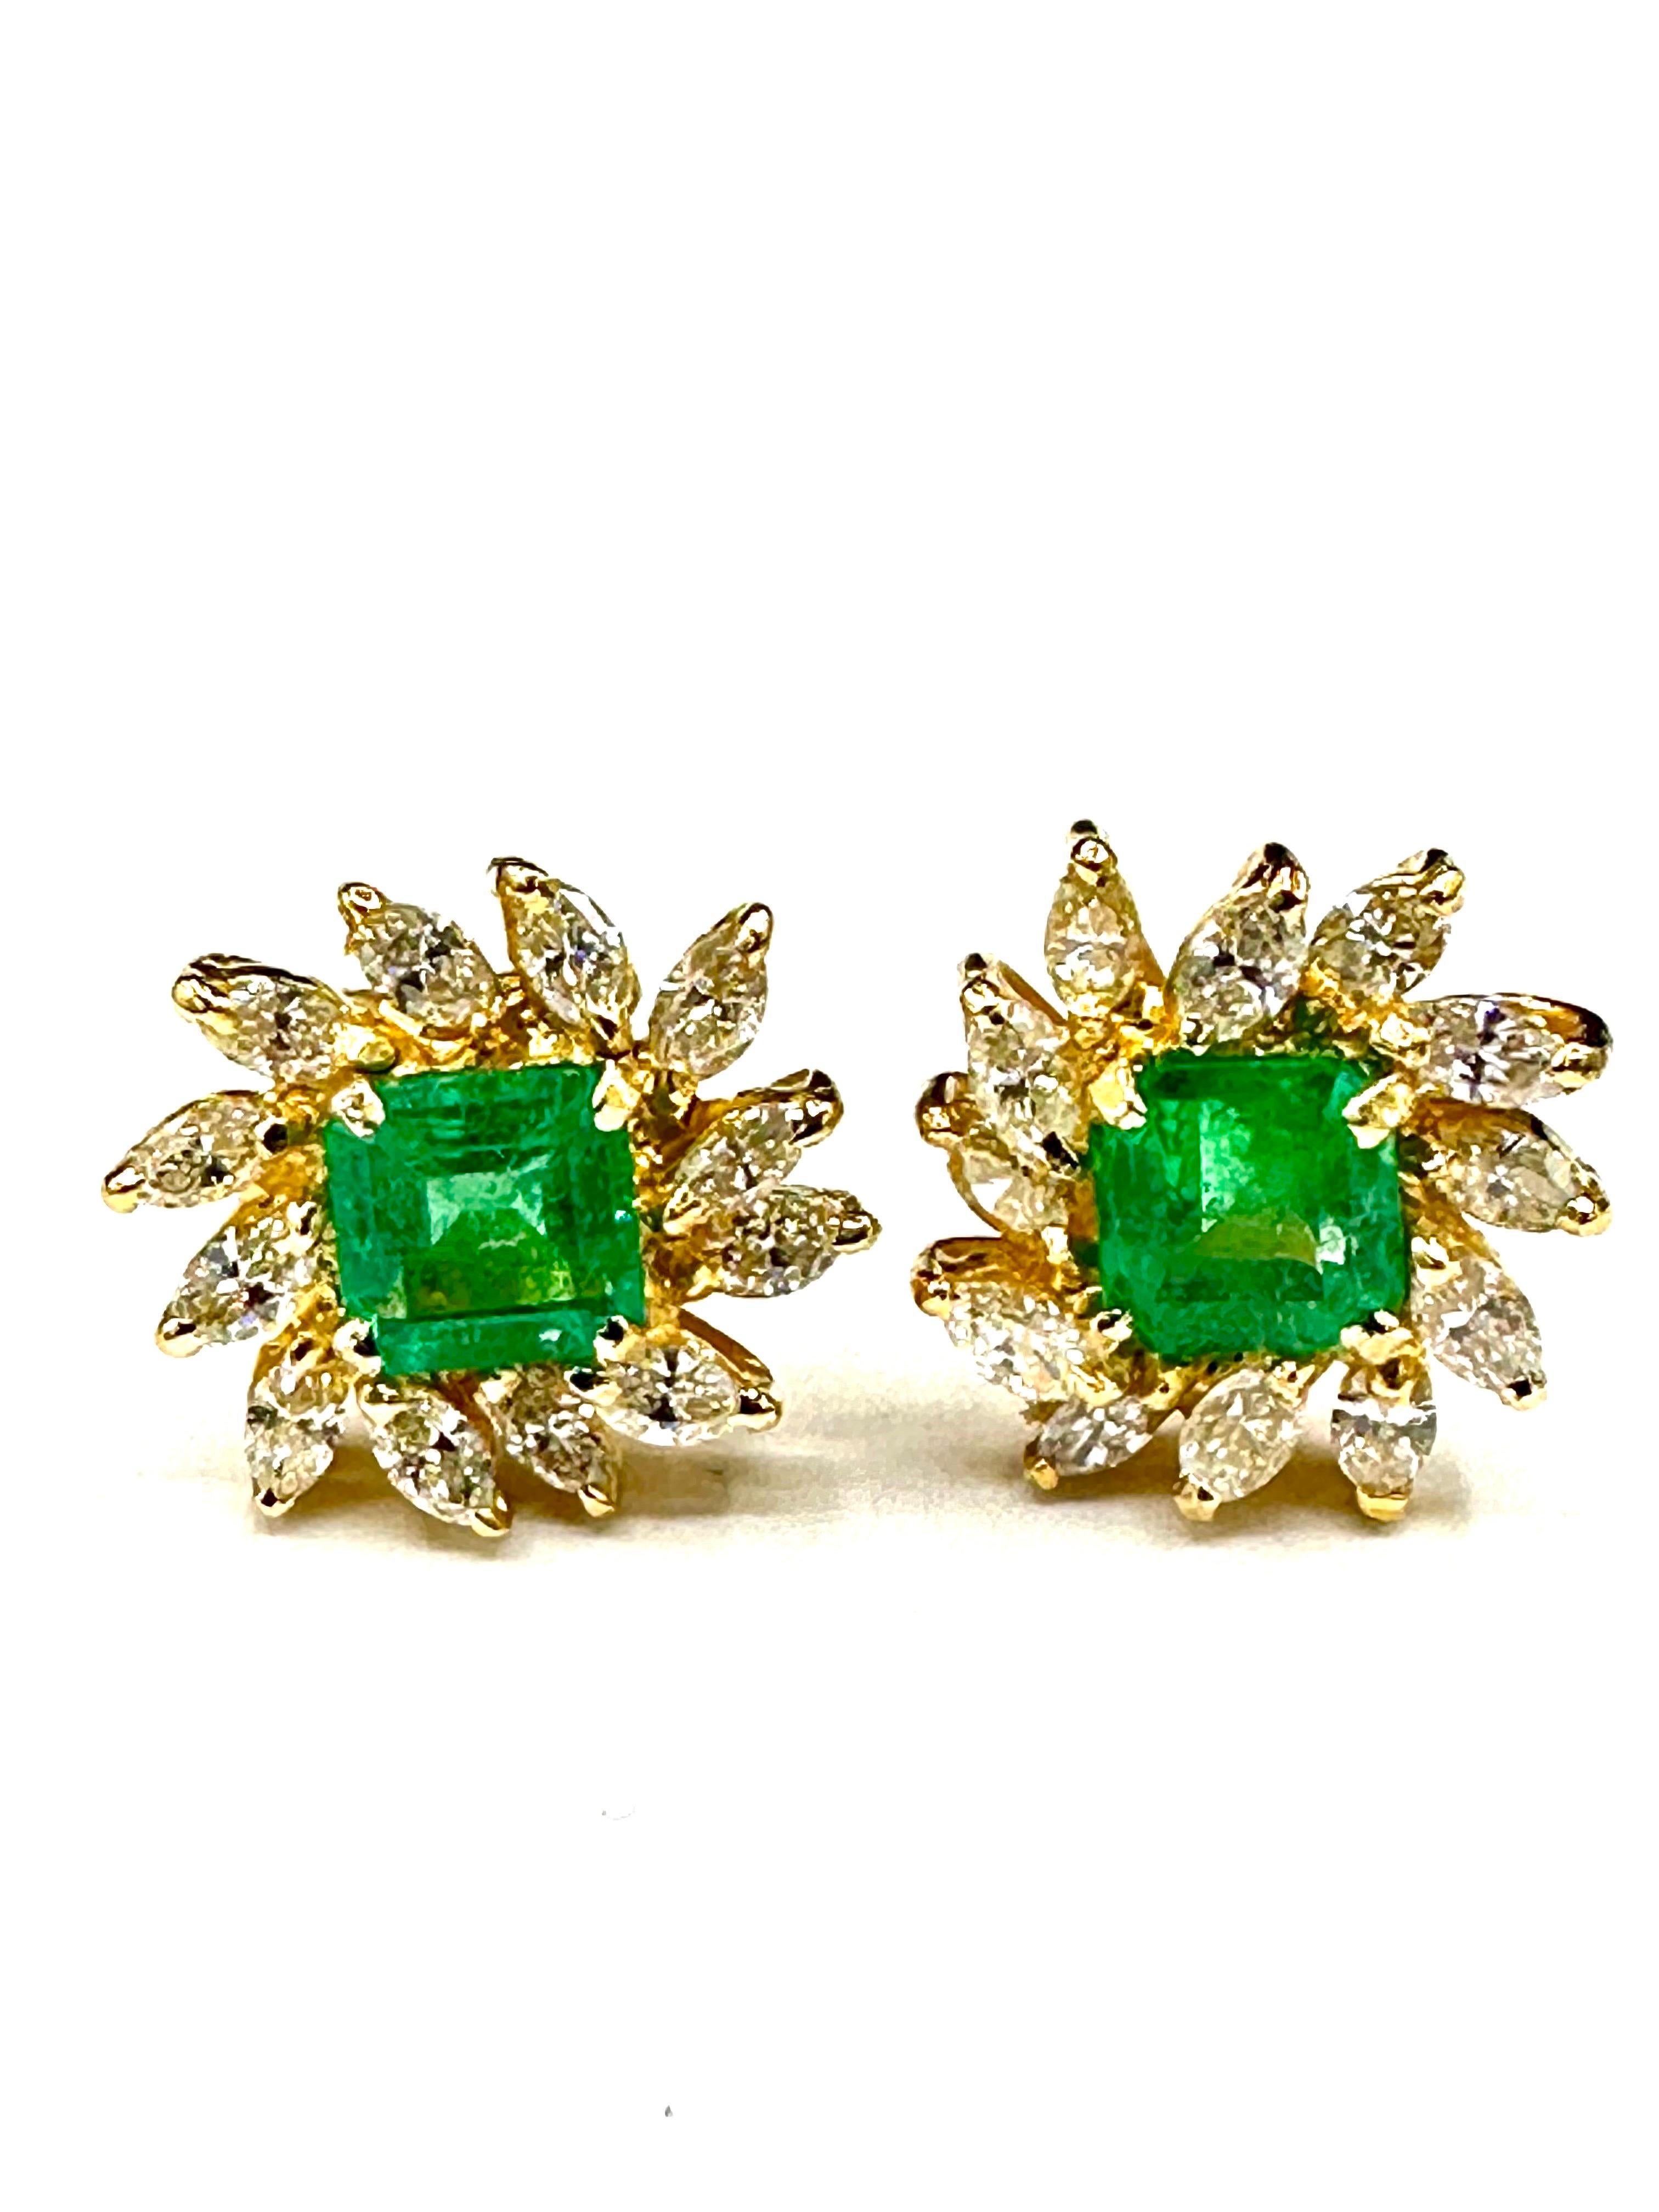 A gorgeous set of Emerald and Diamond earrings!  The Emeralds are set in four prongs, with a single row of diagonally set marquise Diamonds surrounding.  There are two Emeralds with a total weight of 3.16 carats, and 24 Diamonds with a total weight